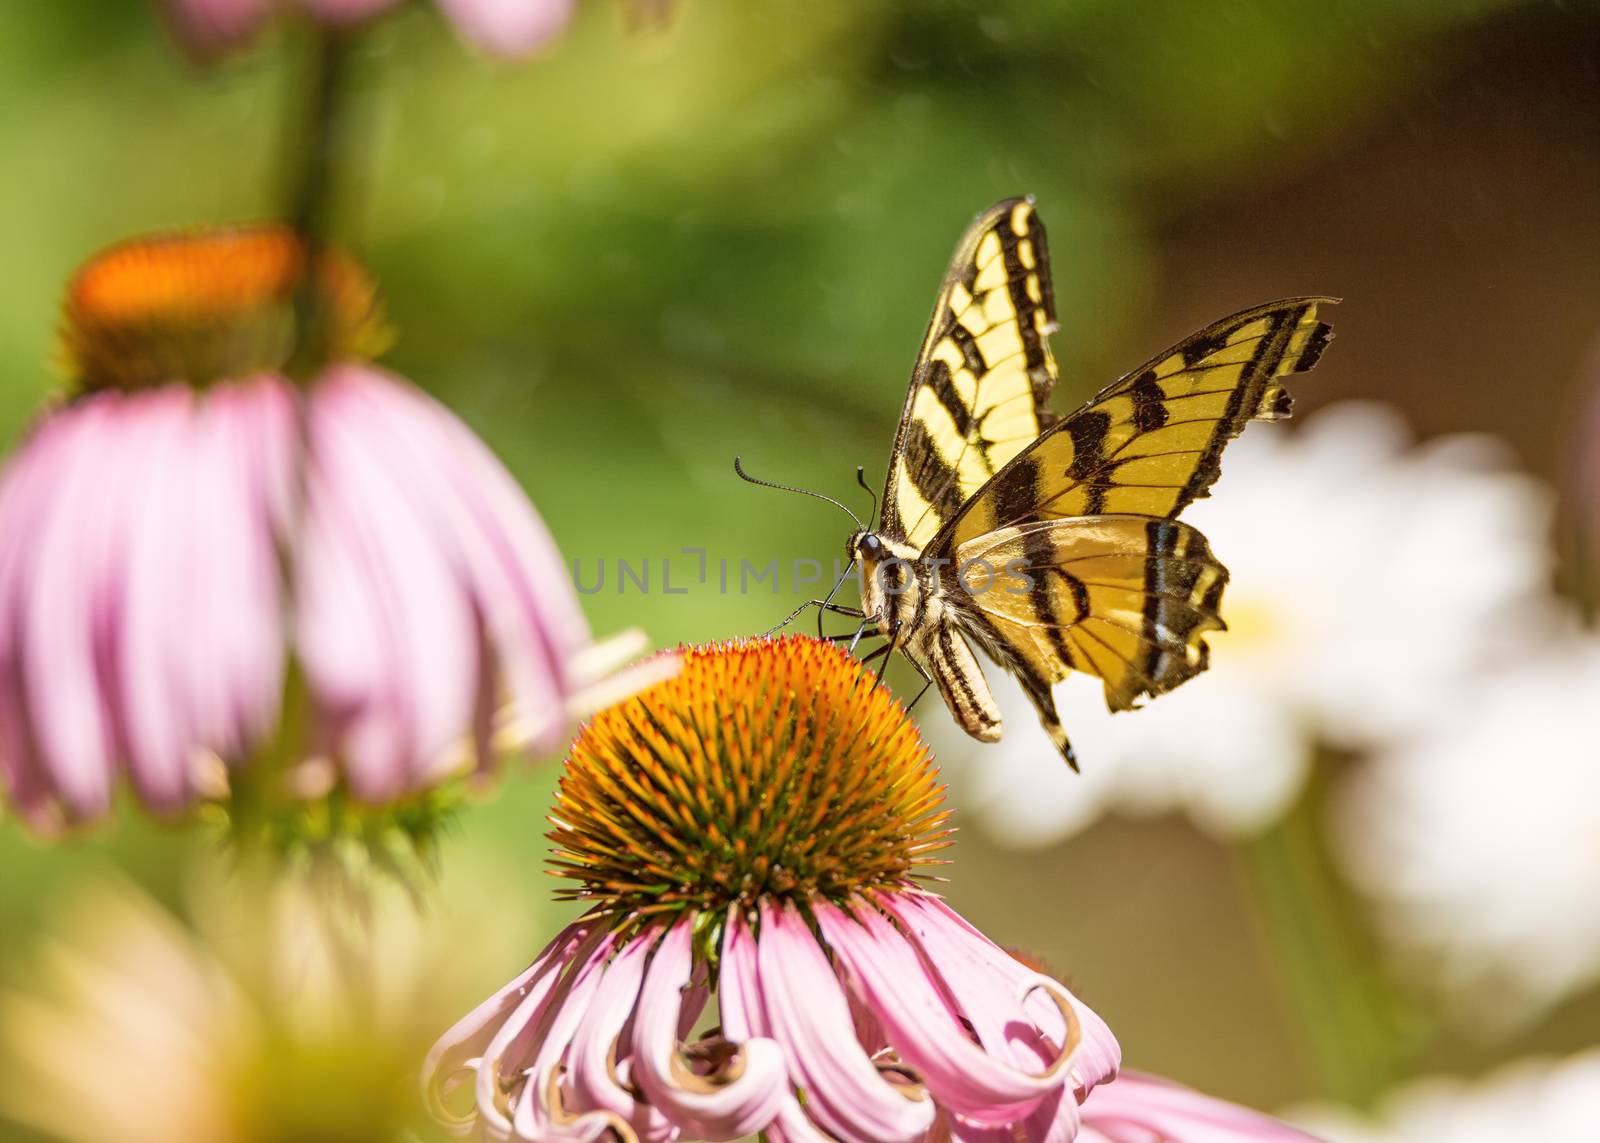 A yellow and black monarch butterfly drinks nectar from a flower.